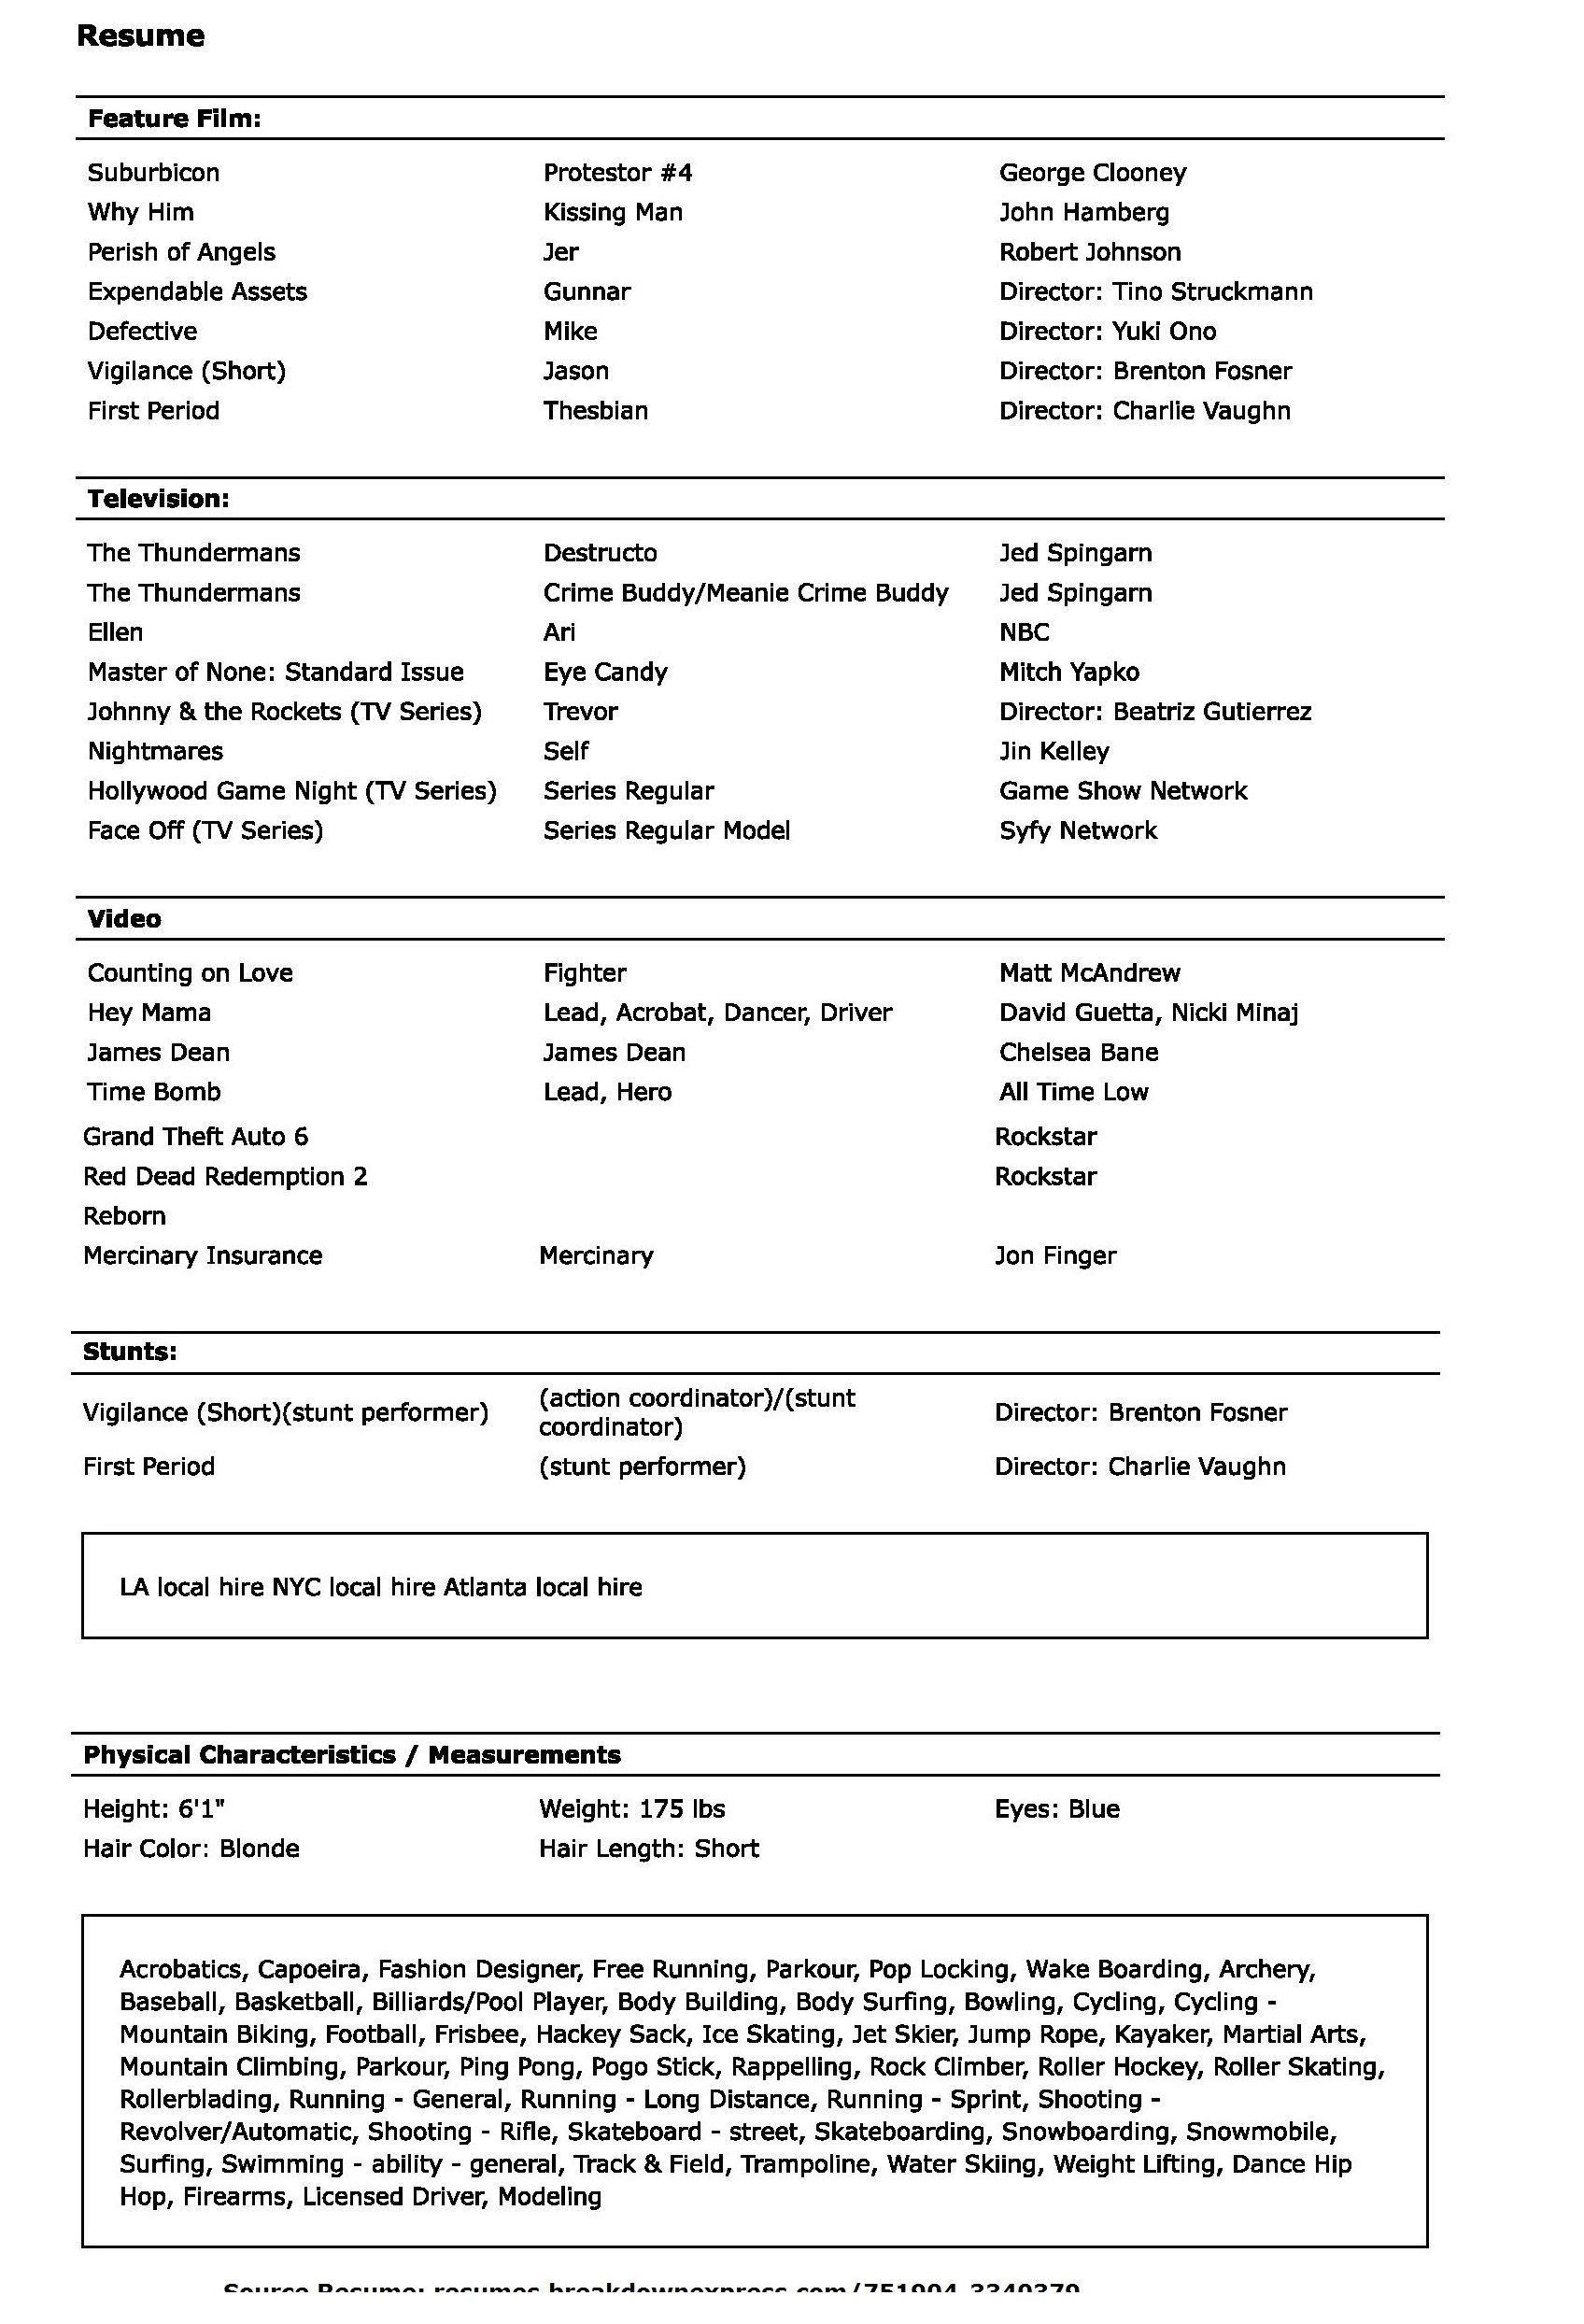 actor resume sample template